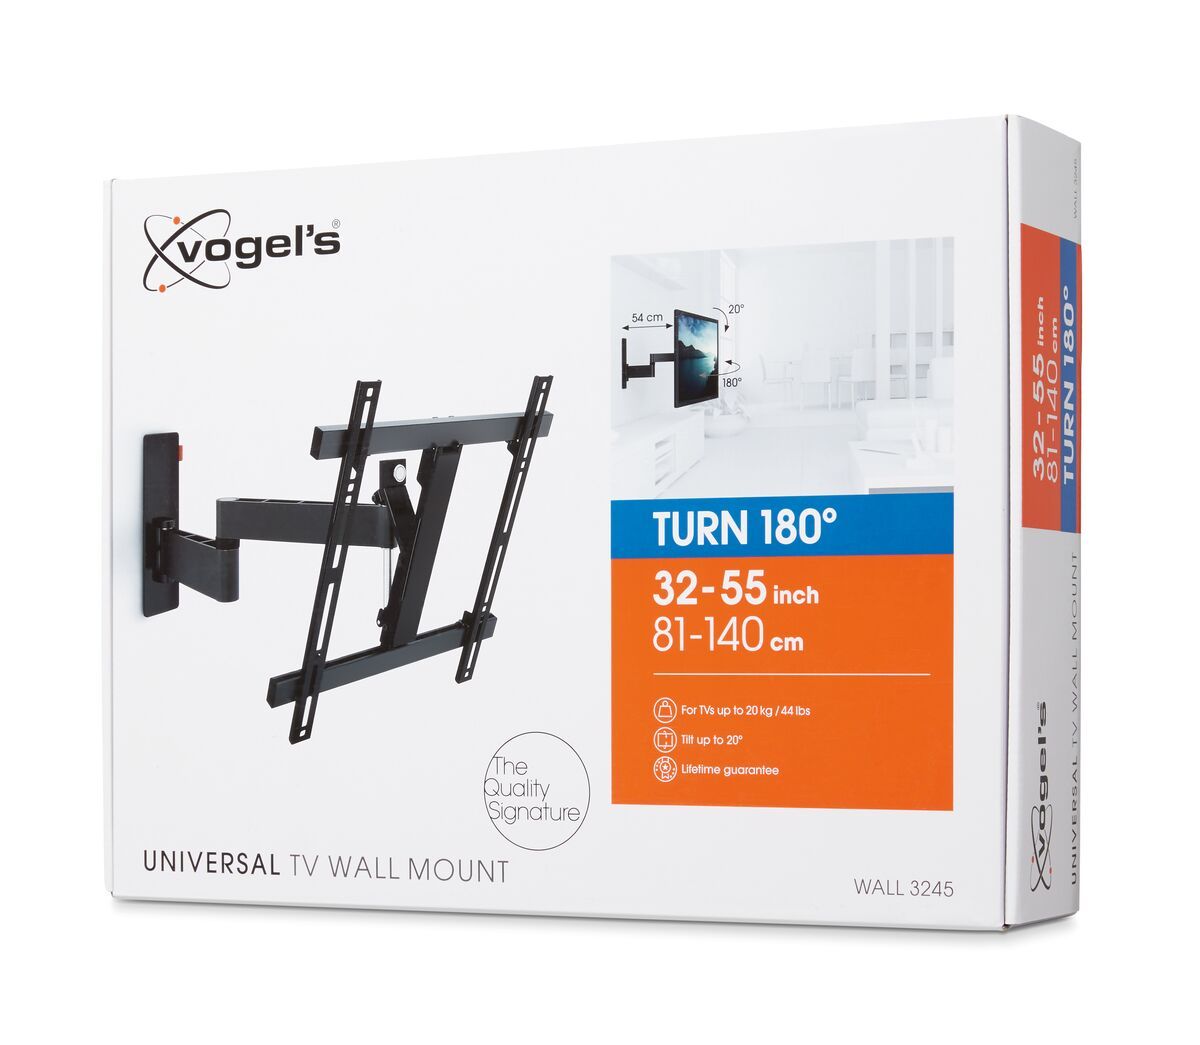 Vogel's WALL 3245 Full-Motion TV Wall Mount (black) - Suitable for 32 up to 55 inch TVs - Full motion (up to 180°) - Tilt up to 20° - Pack shot 3D